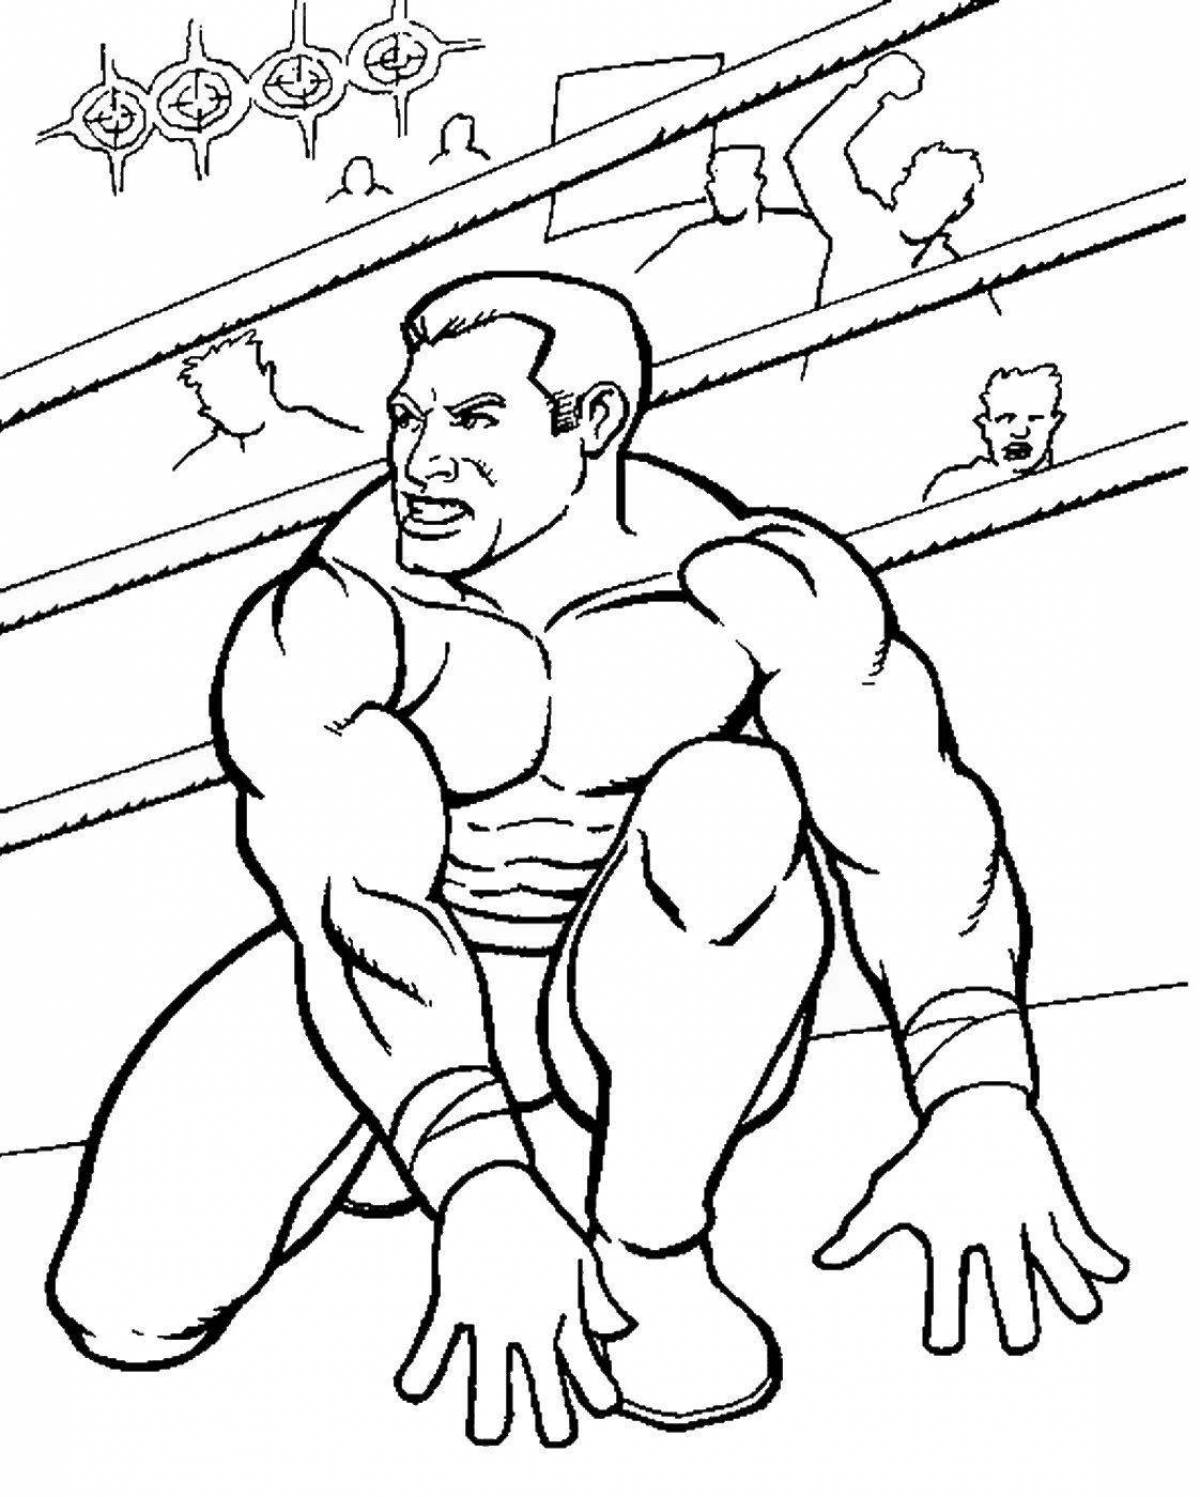 Energetic wrestlers coloring pages